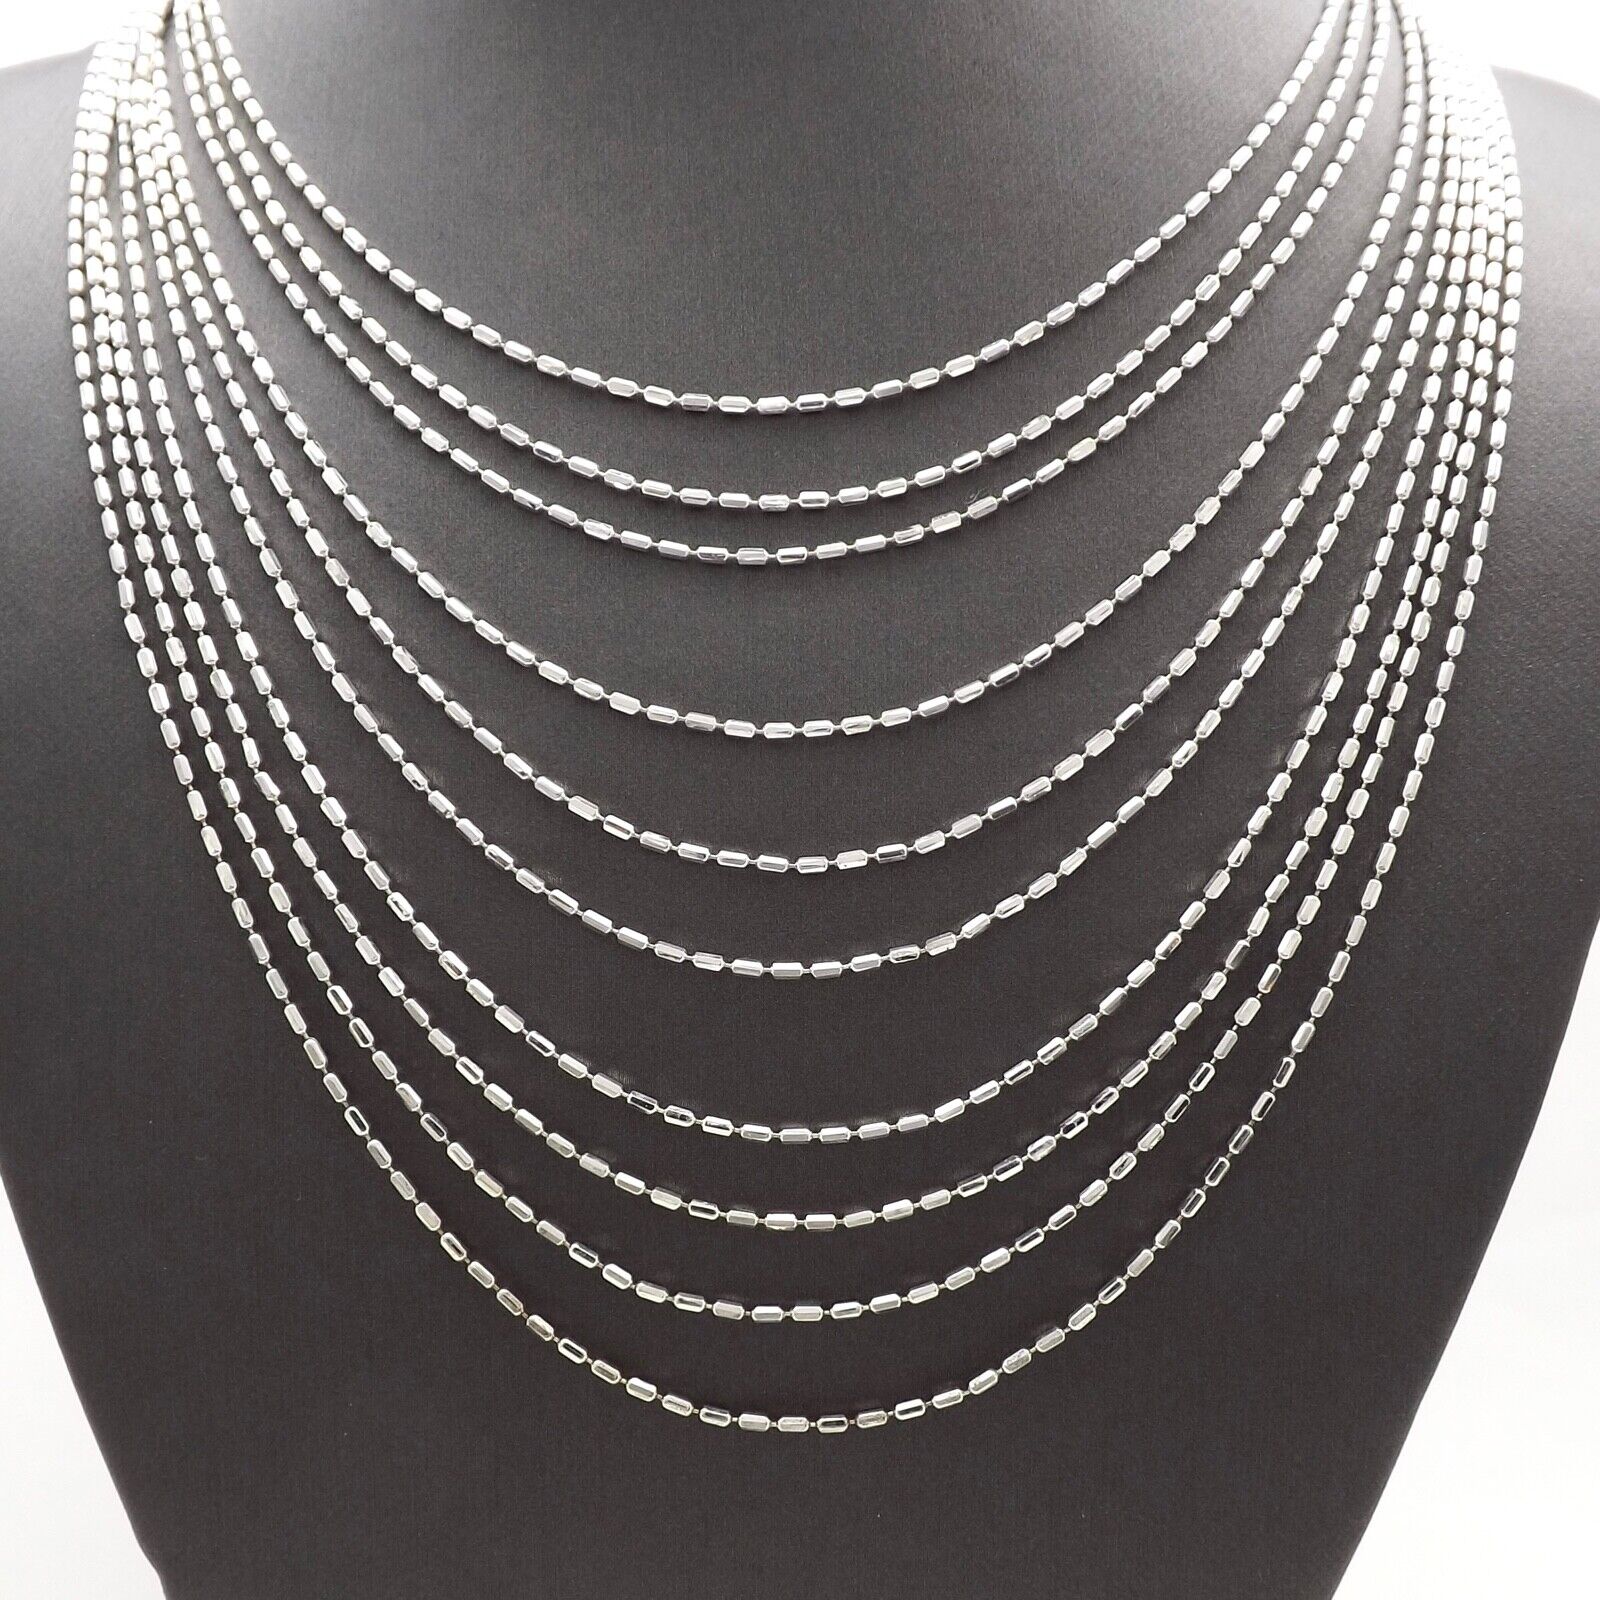 Milor Sterling Italy Bar Bead Liquid Silver 10 Layered Strands Chain  Necklace | eBay